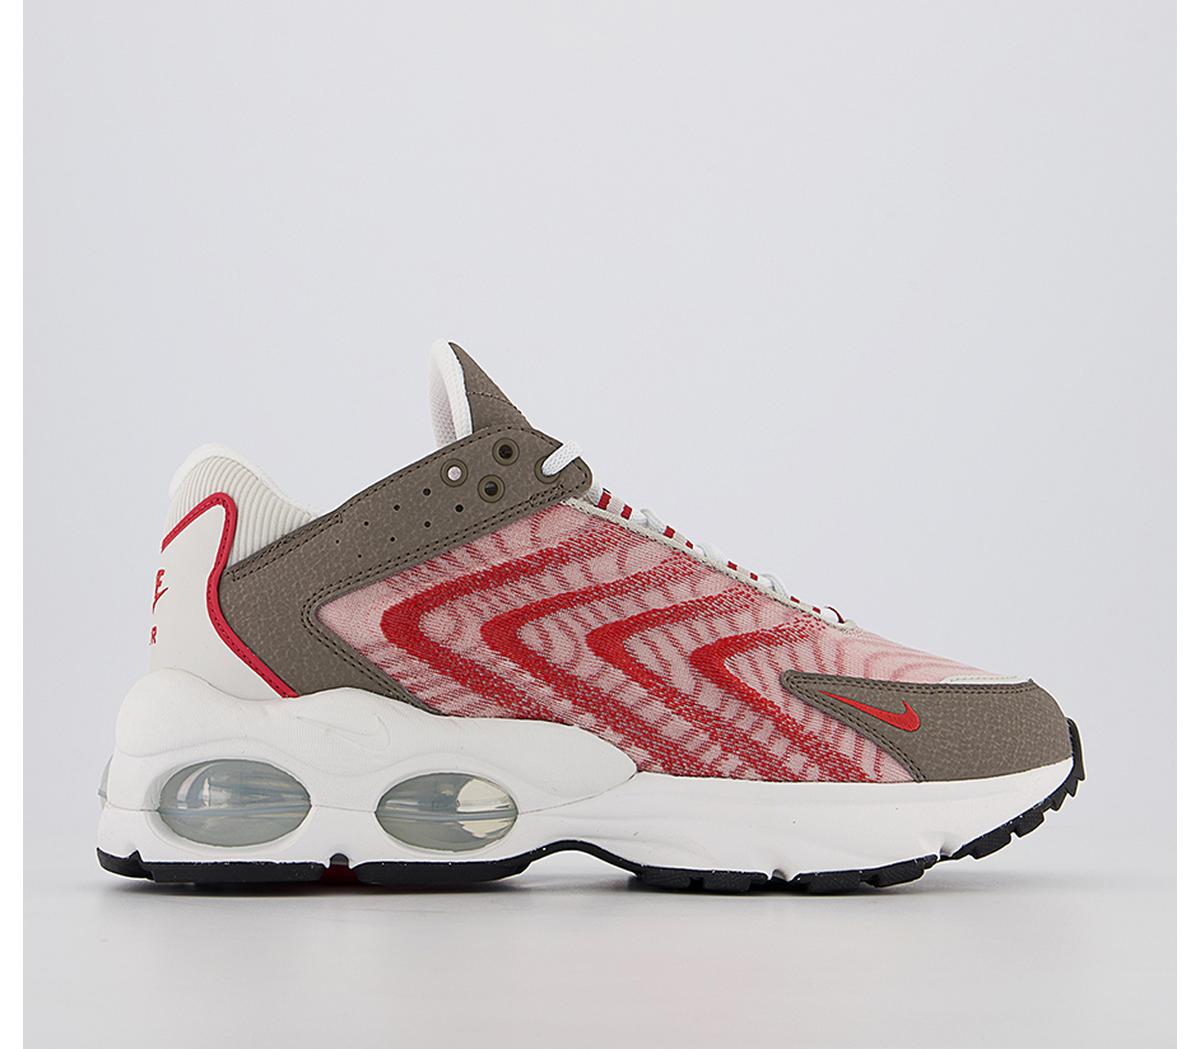 NikeAir Max Tailwind Trainers Light Bone Red Clay Olive Grey